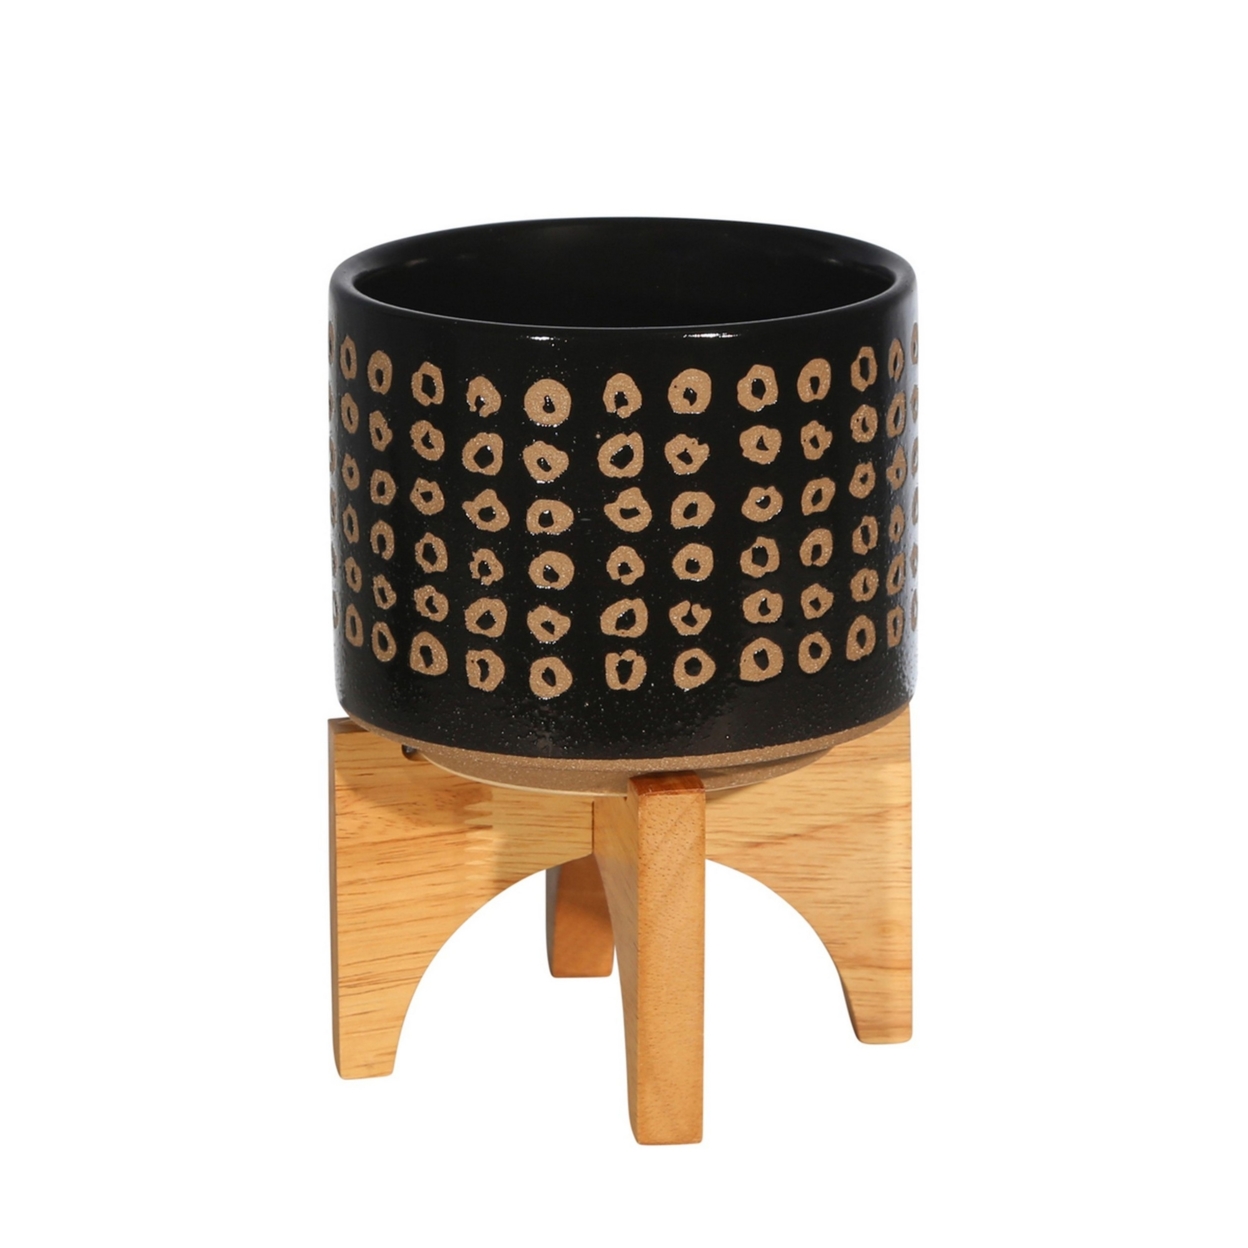 Planter With Wooden Stand And Abstract Design, Small, Black- Saltoro Sherpi